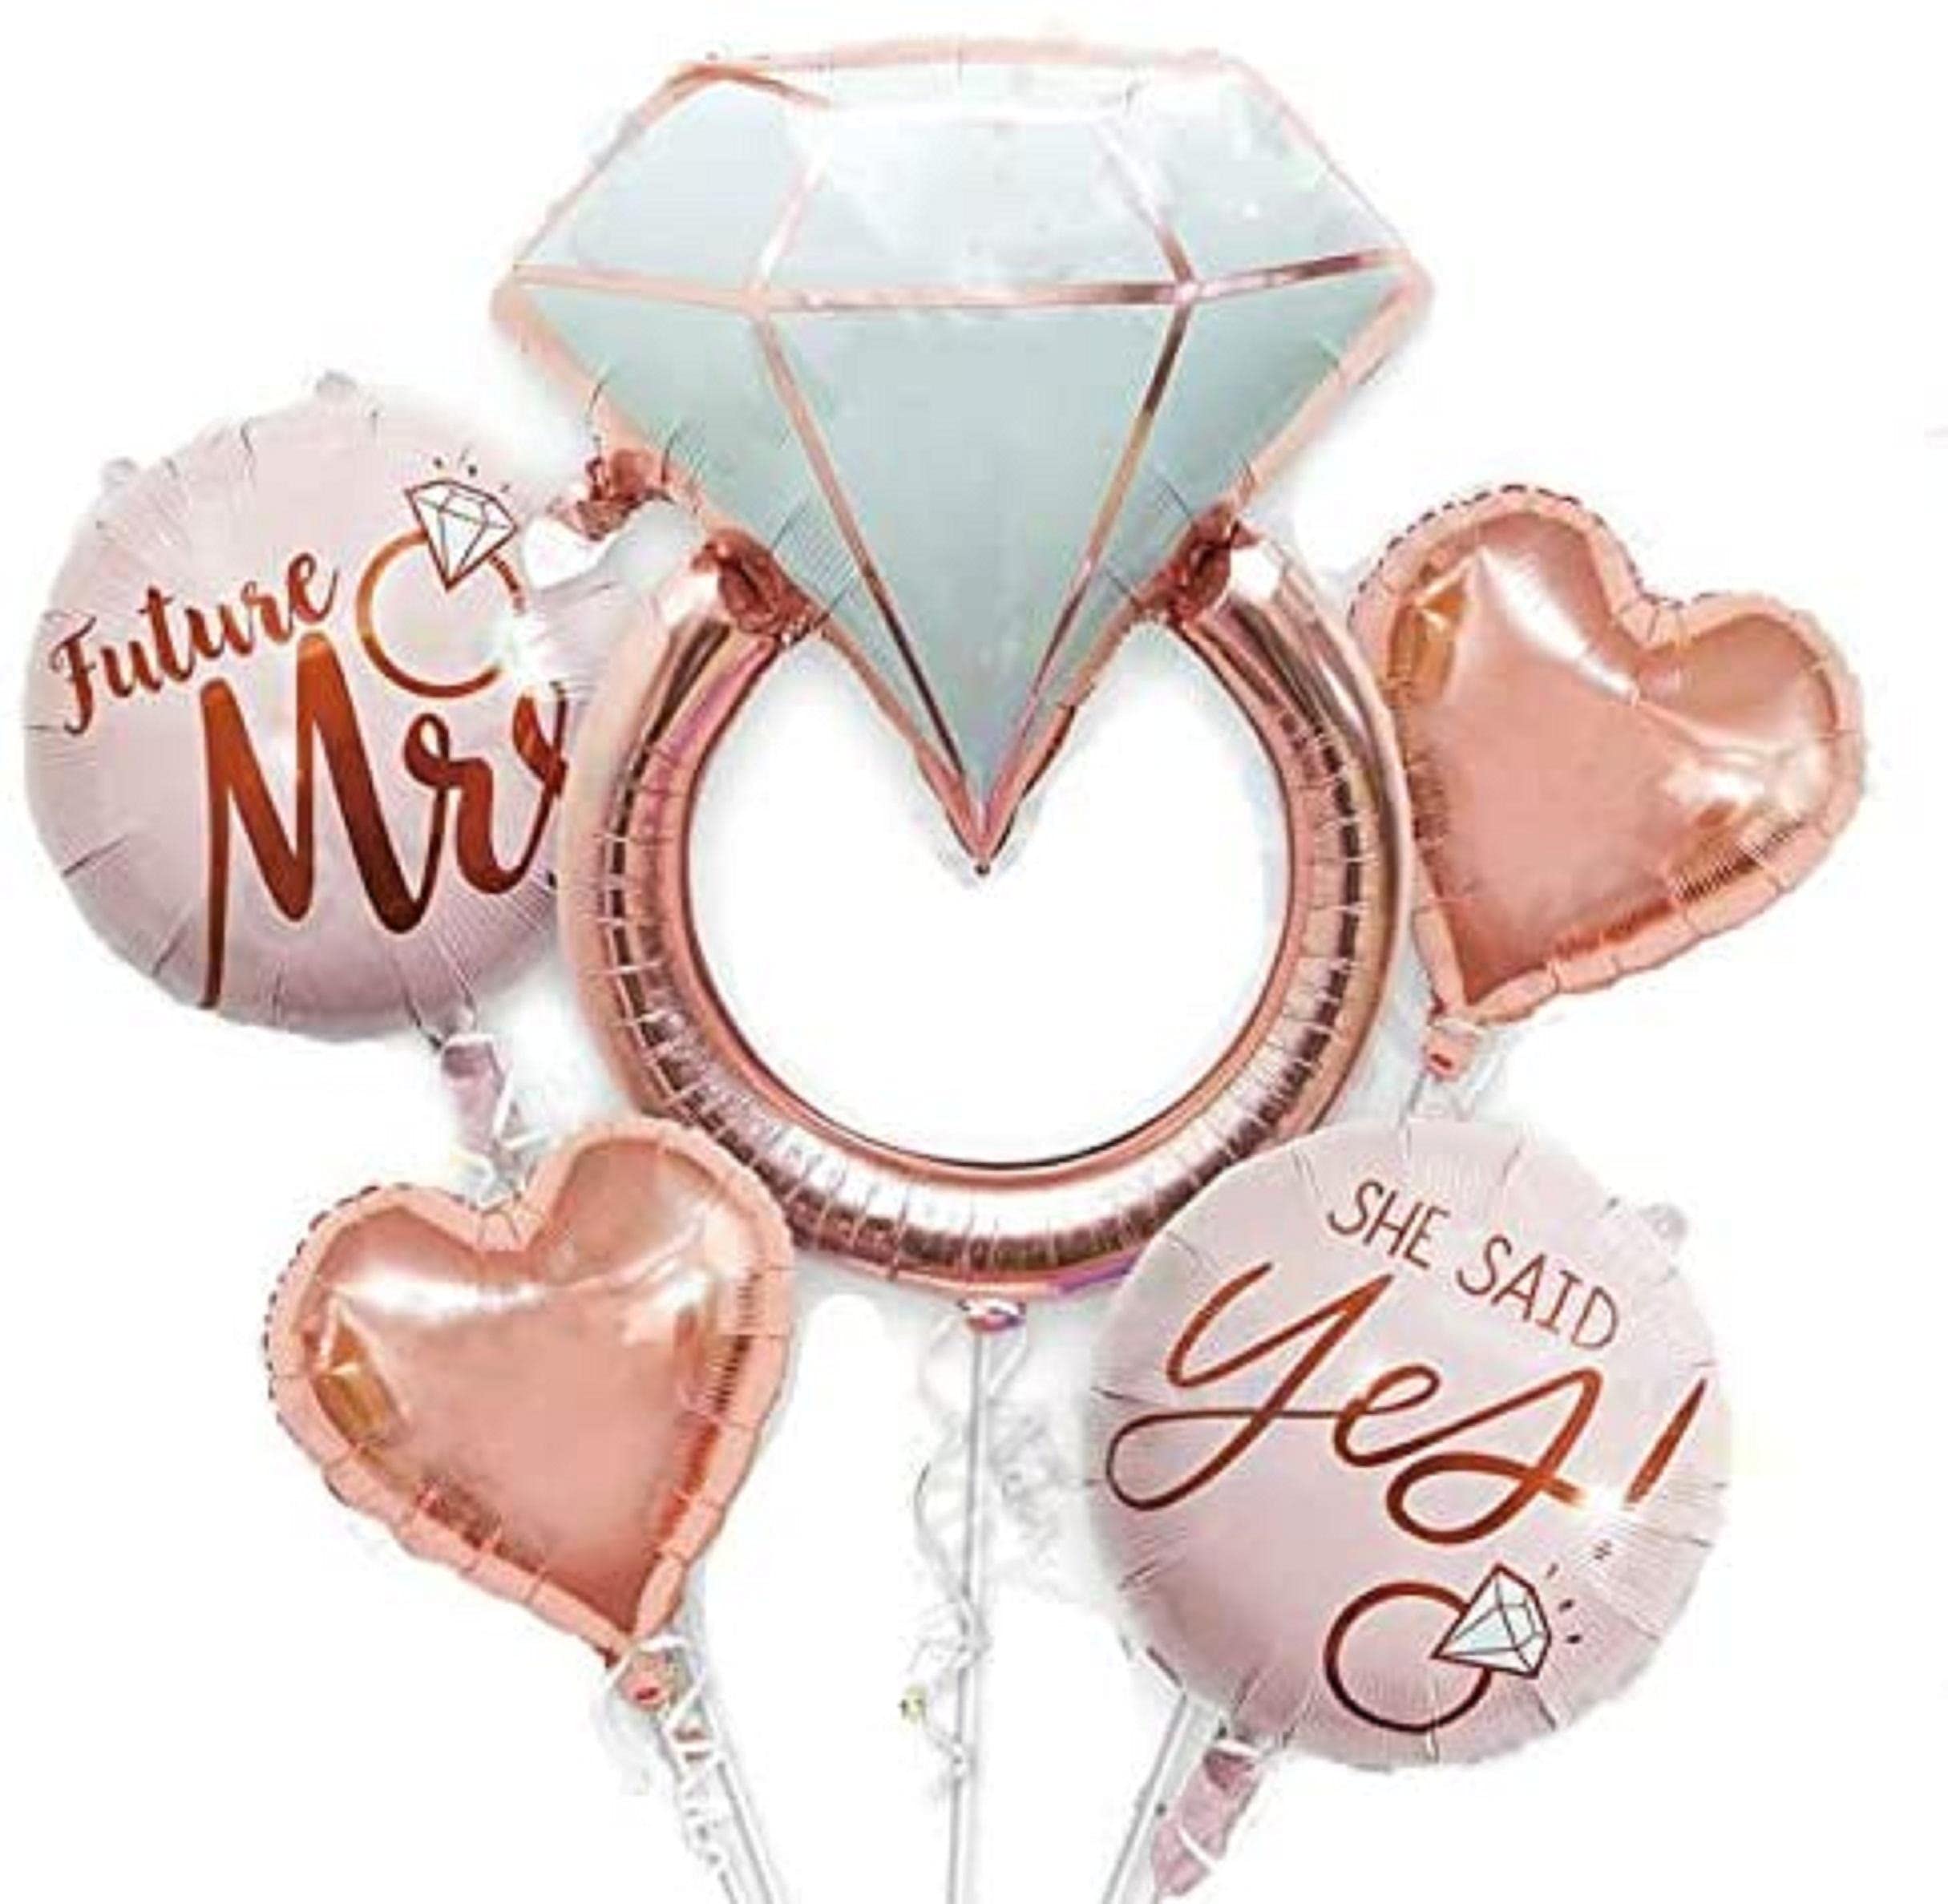 she-said-yes-&amp-future-mrs-&amp-diamond-ring--foil-balloons-rose-gold--5-piece-set-